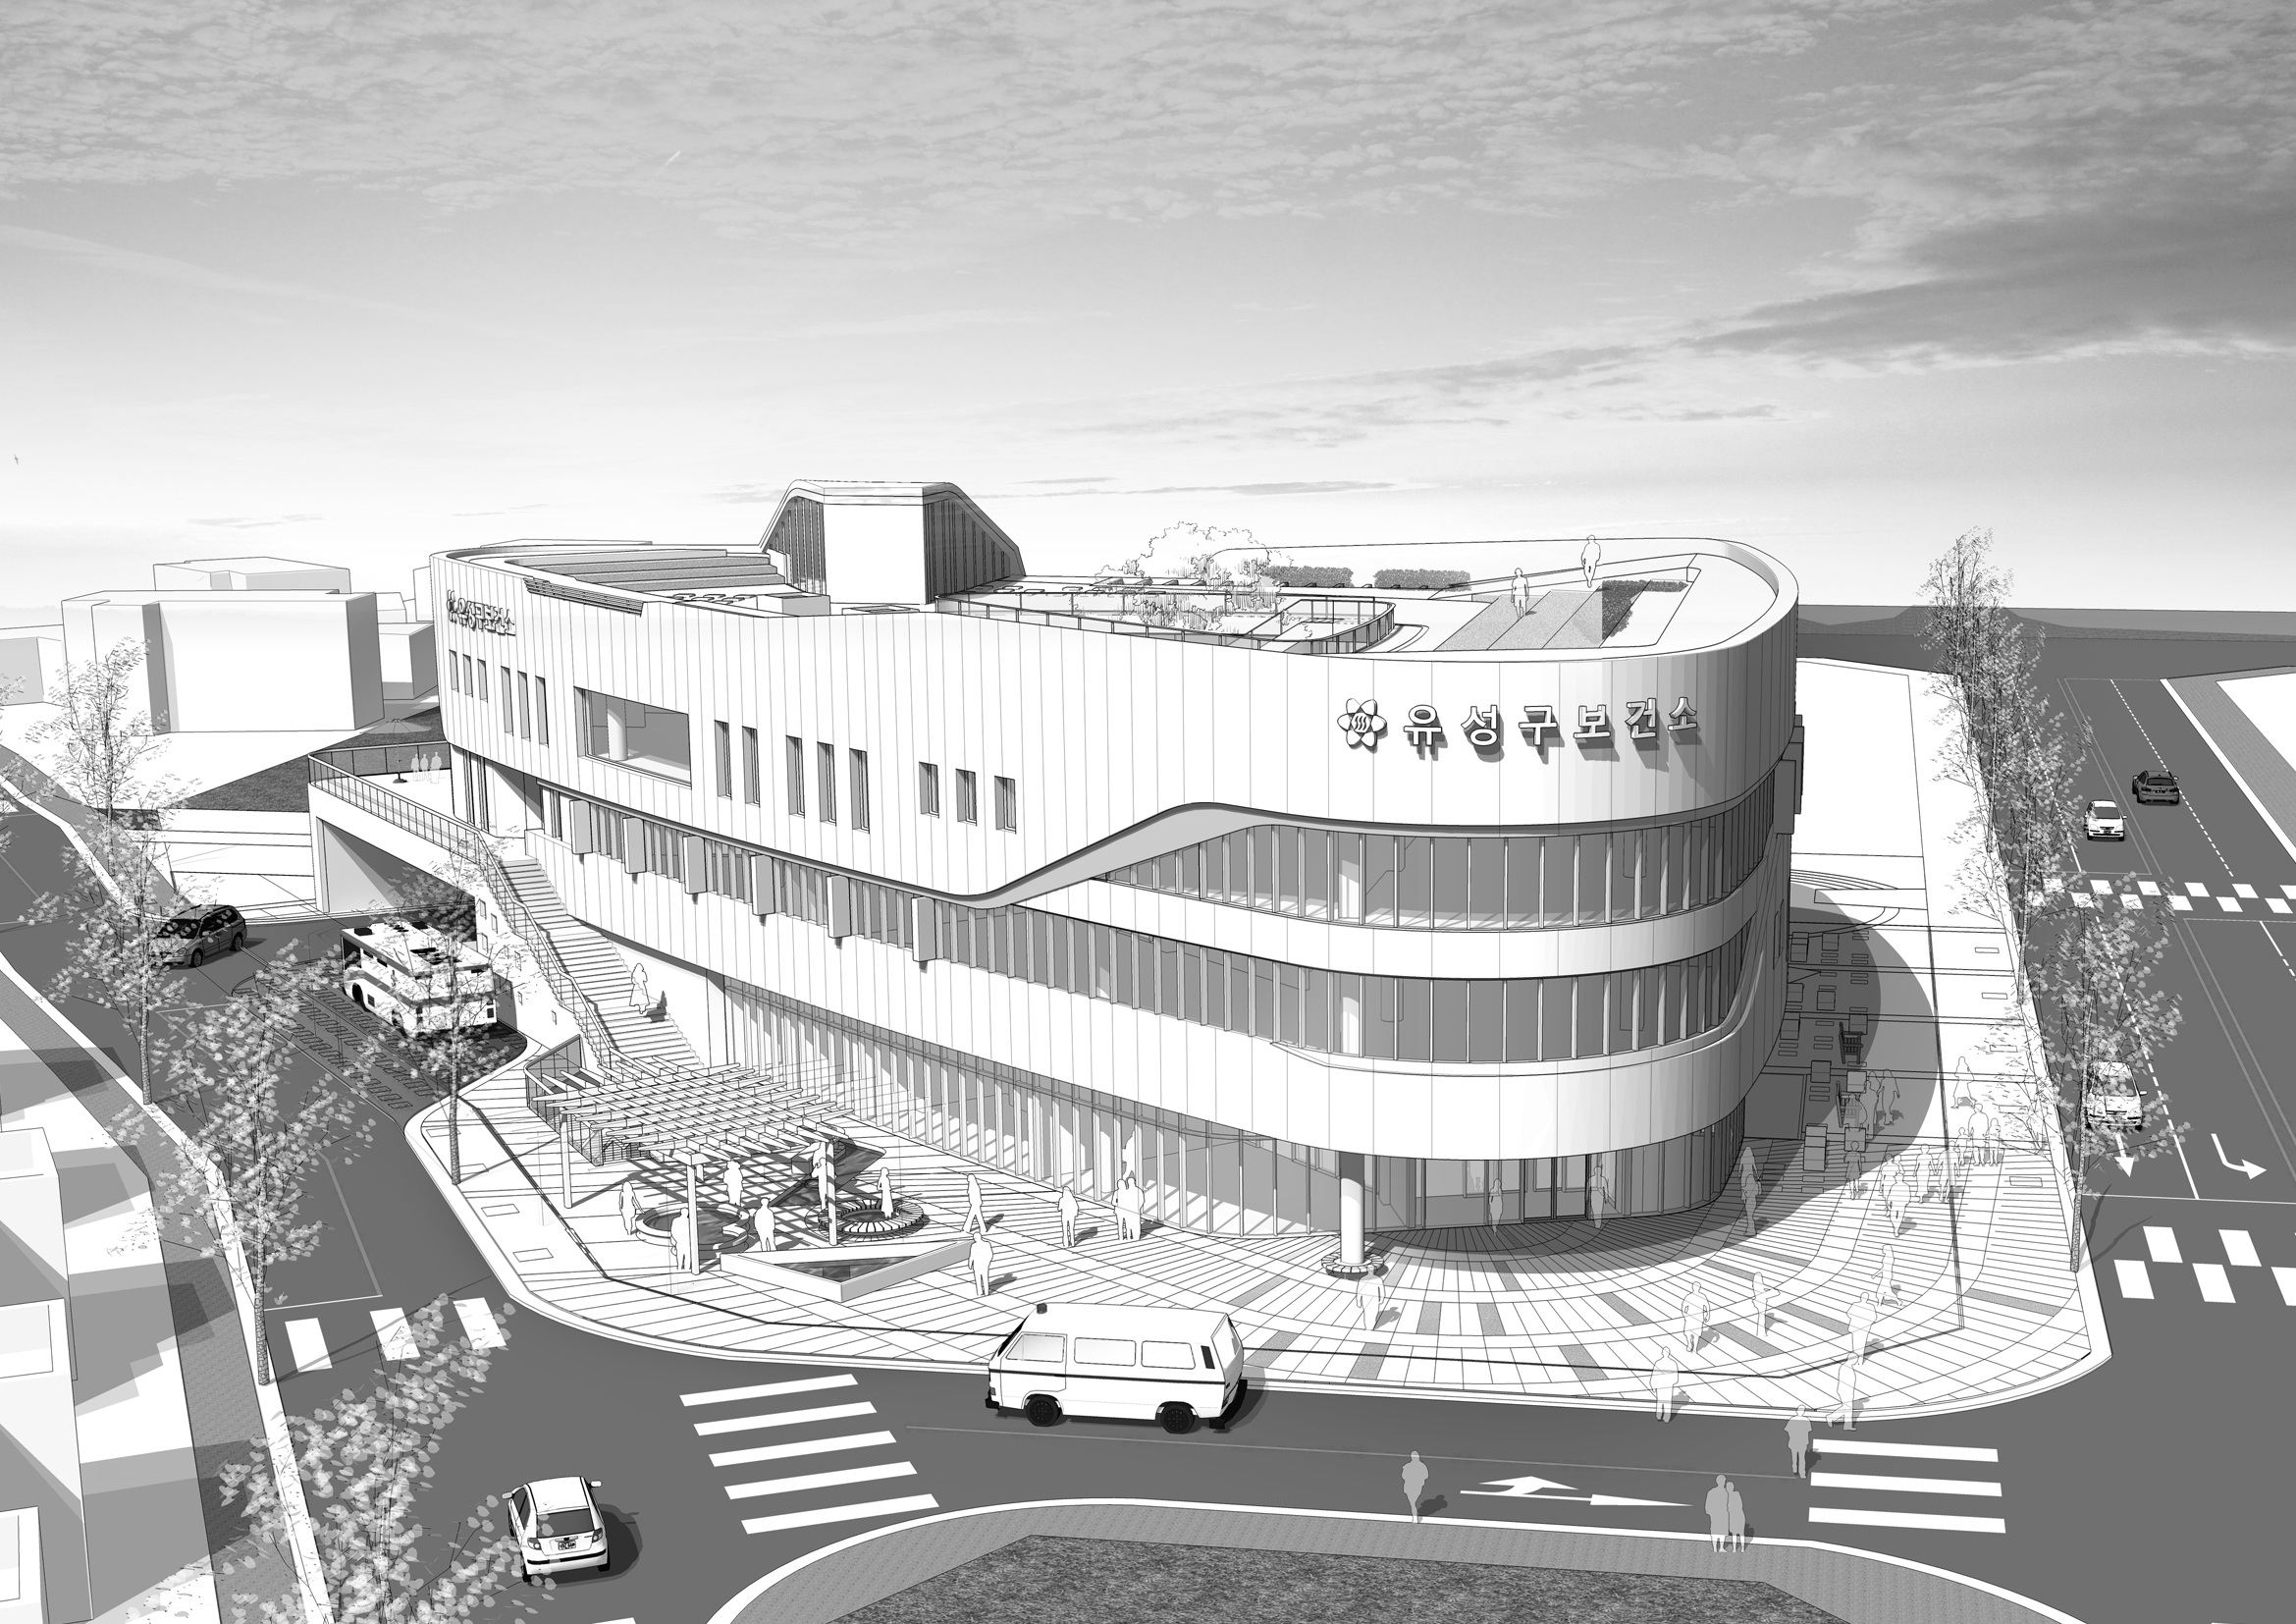 Yuseong Public Health Center Competition